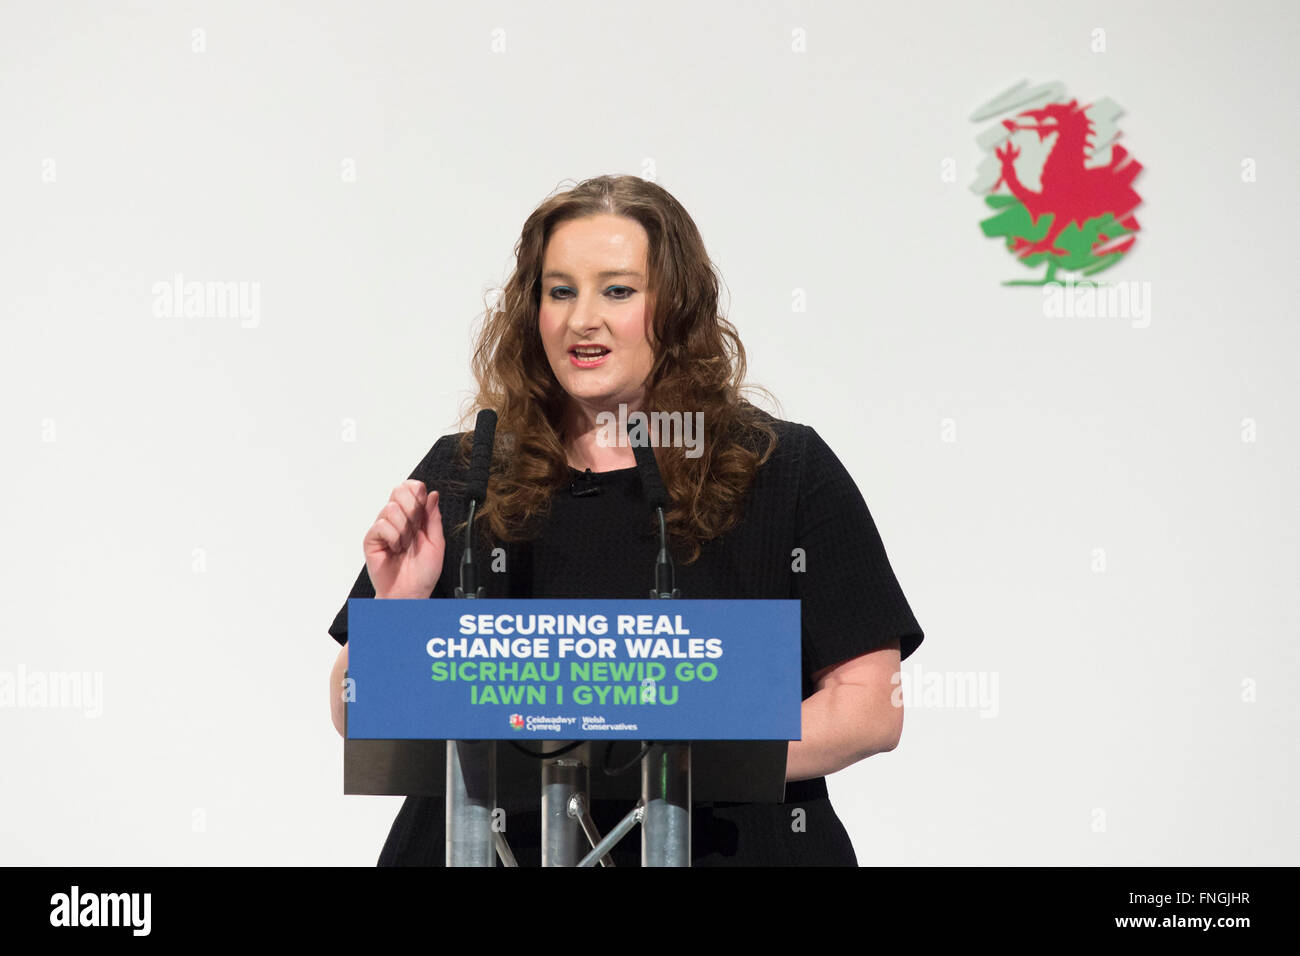 Jayne Cowan AM conservatore candidato per Cardiff North in Welsh Assembly elezioni. Foto Stock